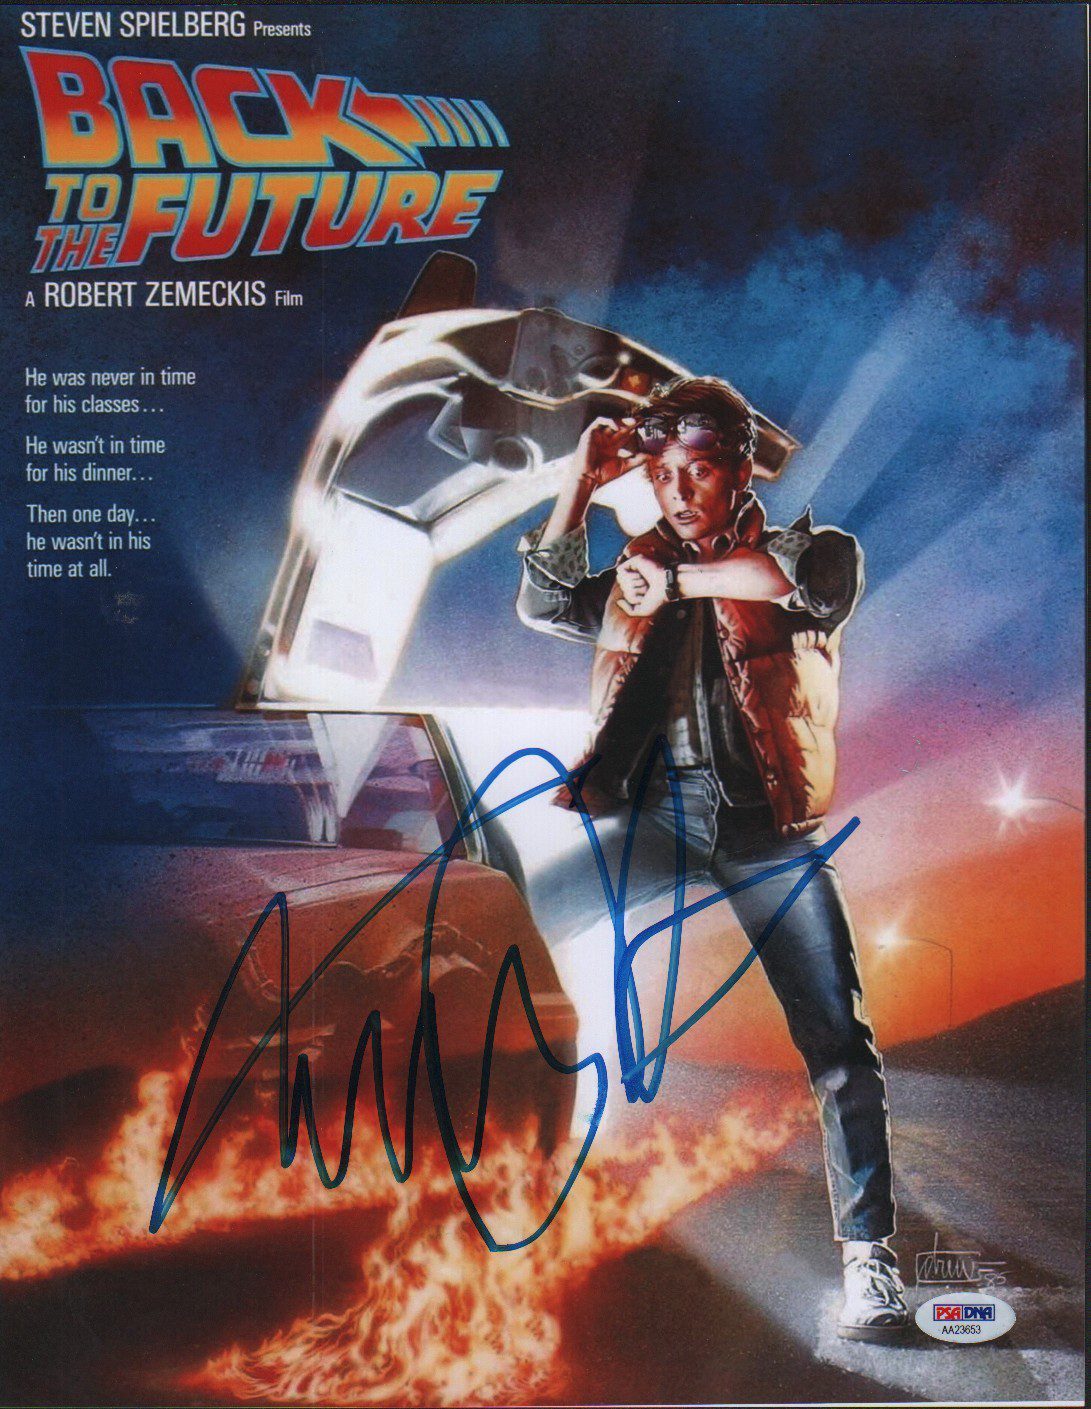 Signed Back to The Future Movie Poster